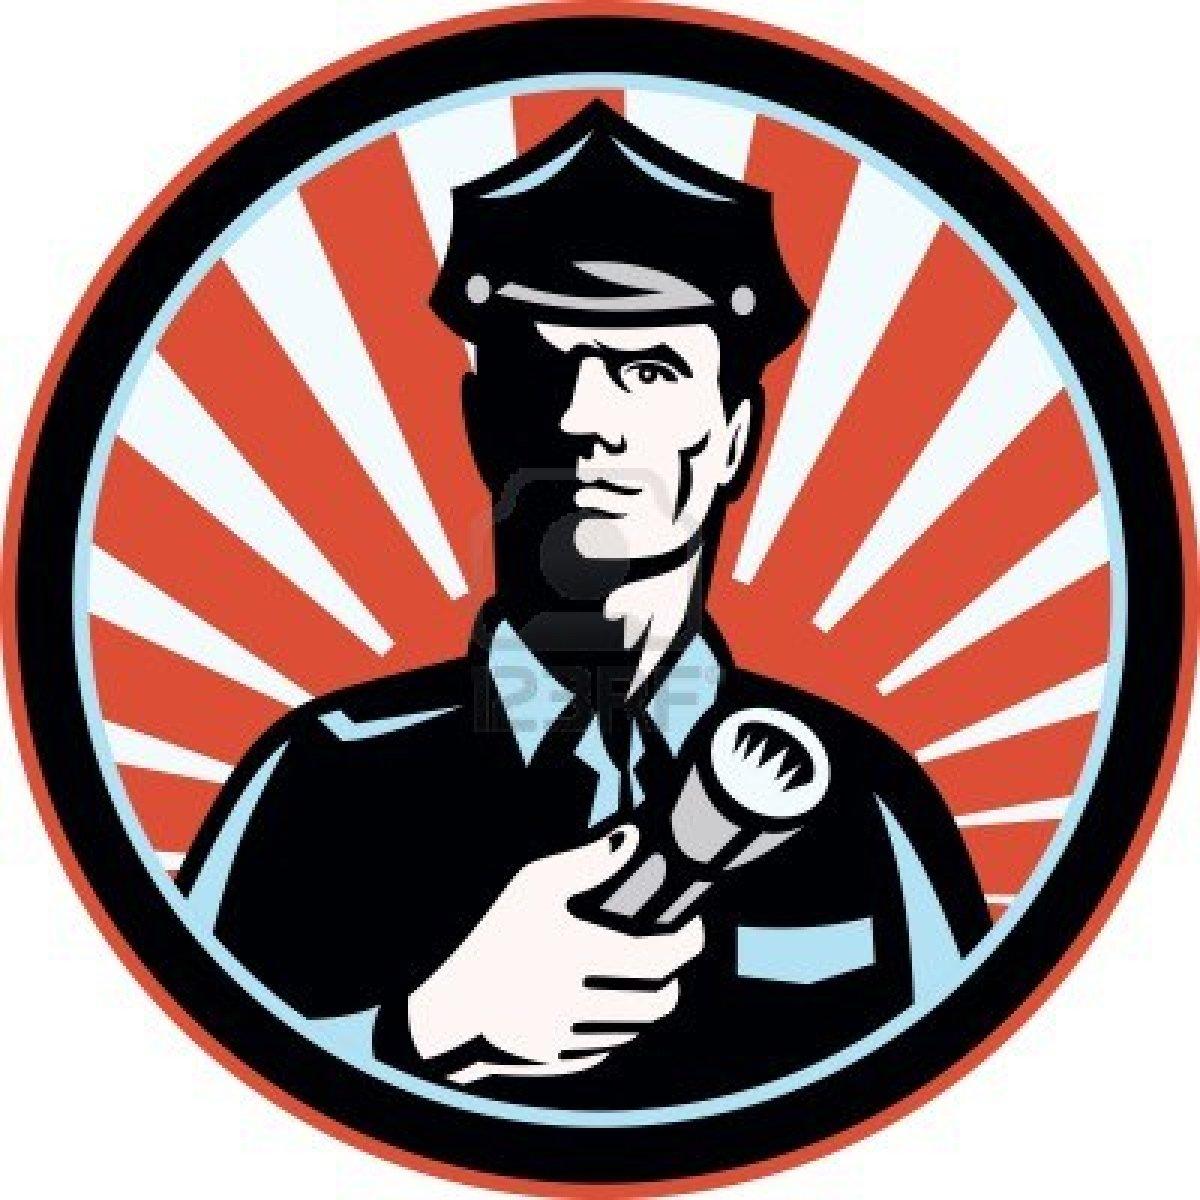 Illustration of a police officer policeman security guard holding a flashlight torch set inside circle done in retro style  Stock Photo - 13248546